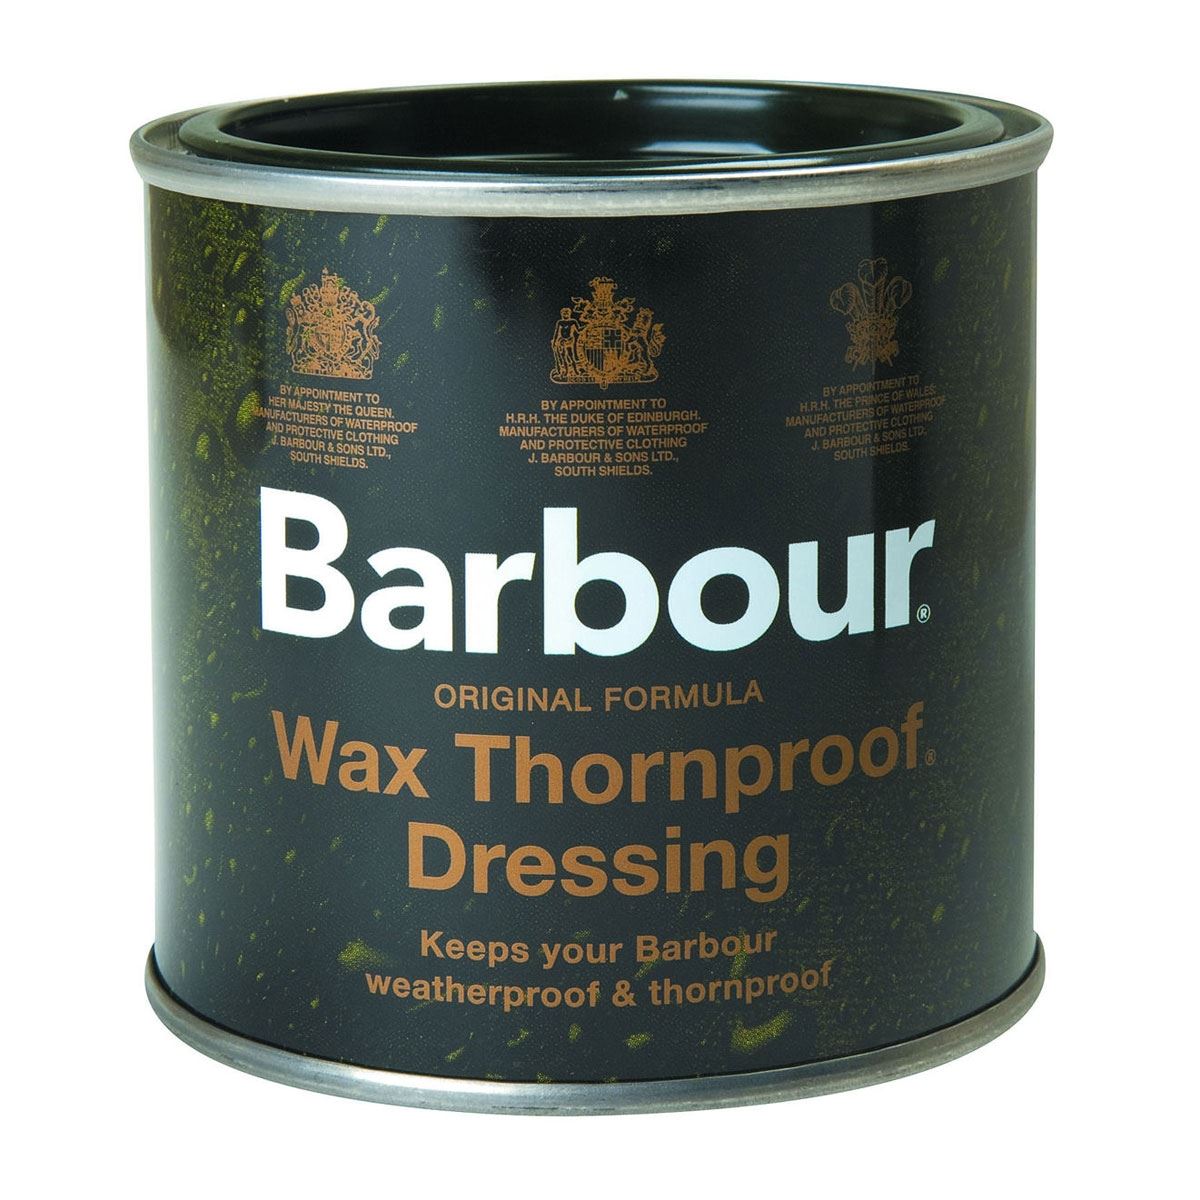 What are the attributes of barbour wax for the Thornproof Dressing?